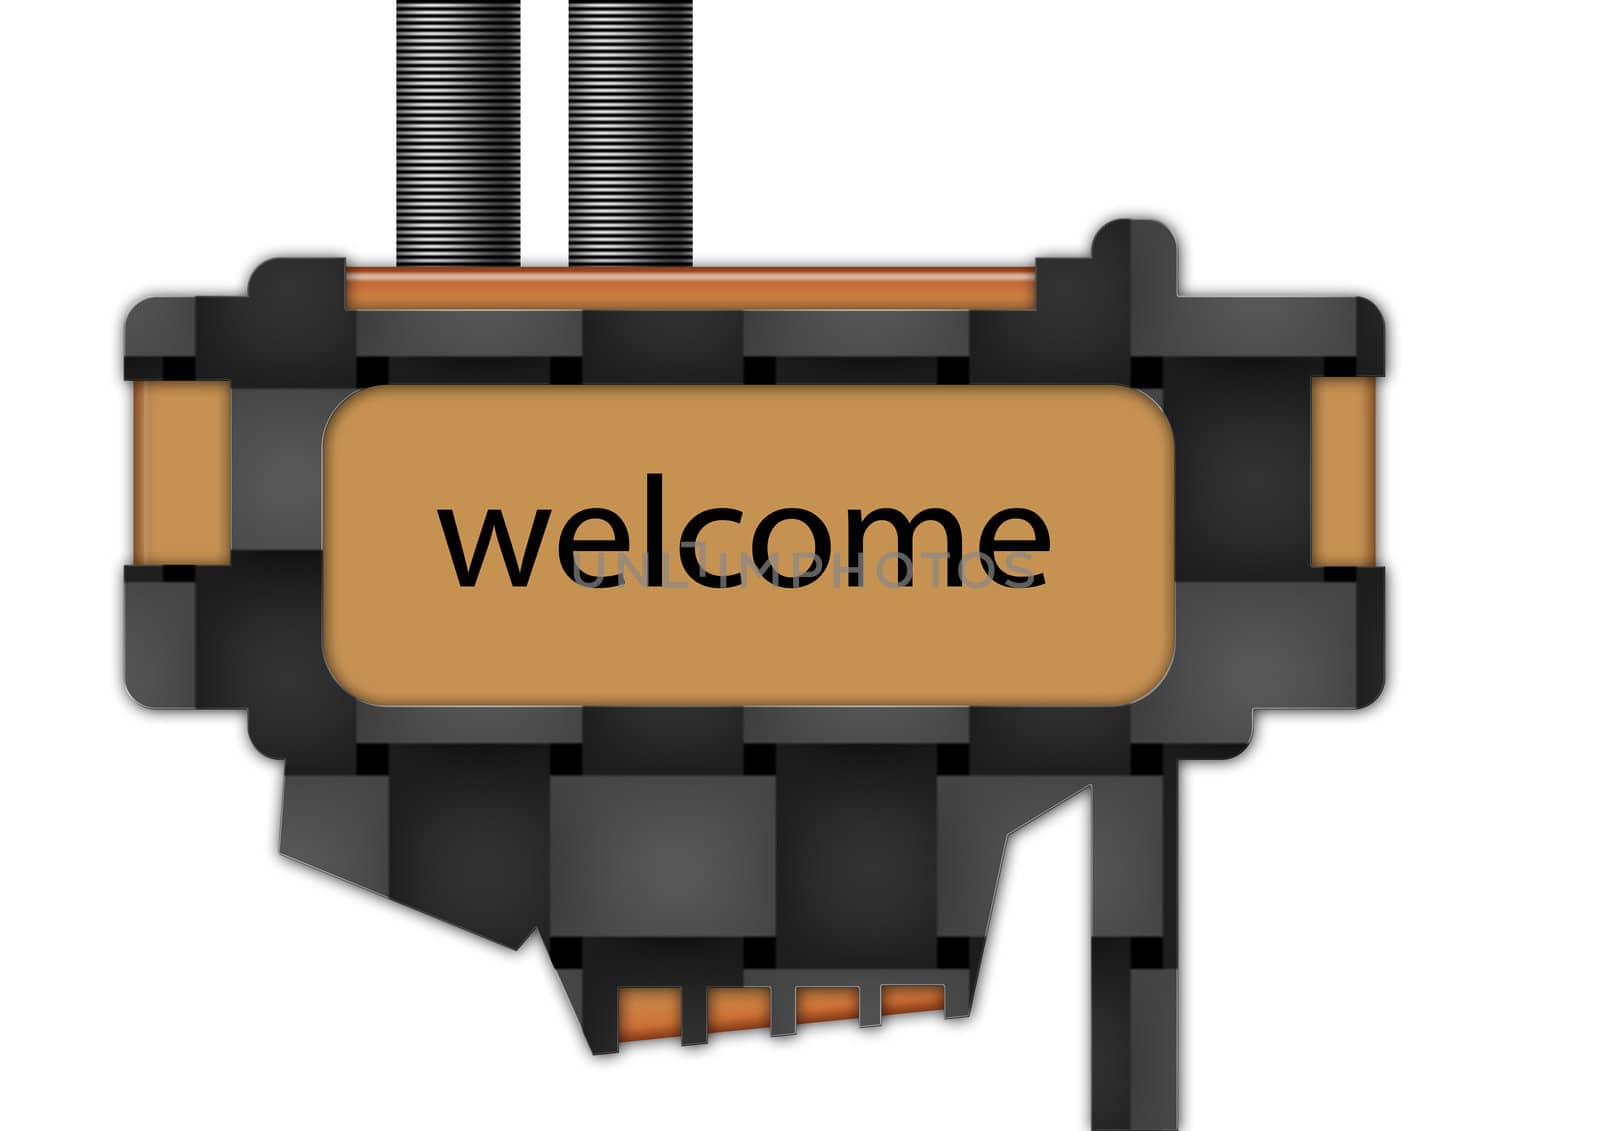 Sign - Welcome by werg